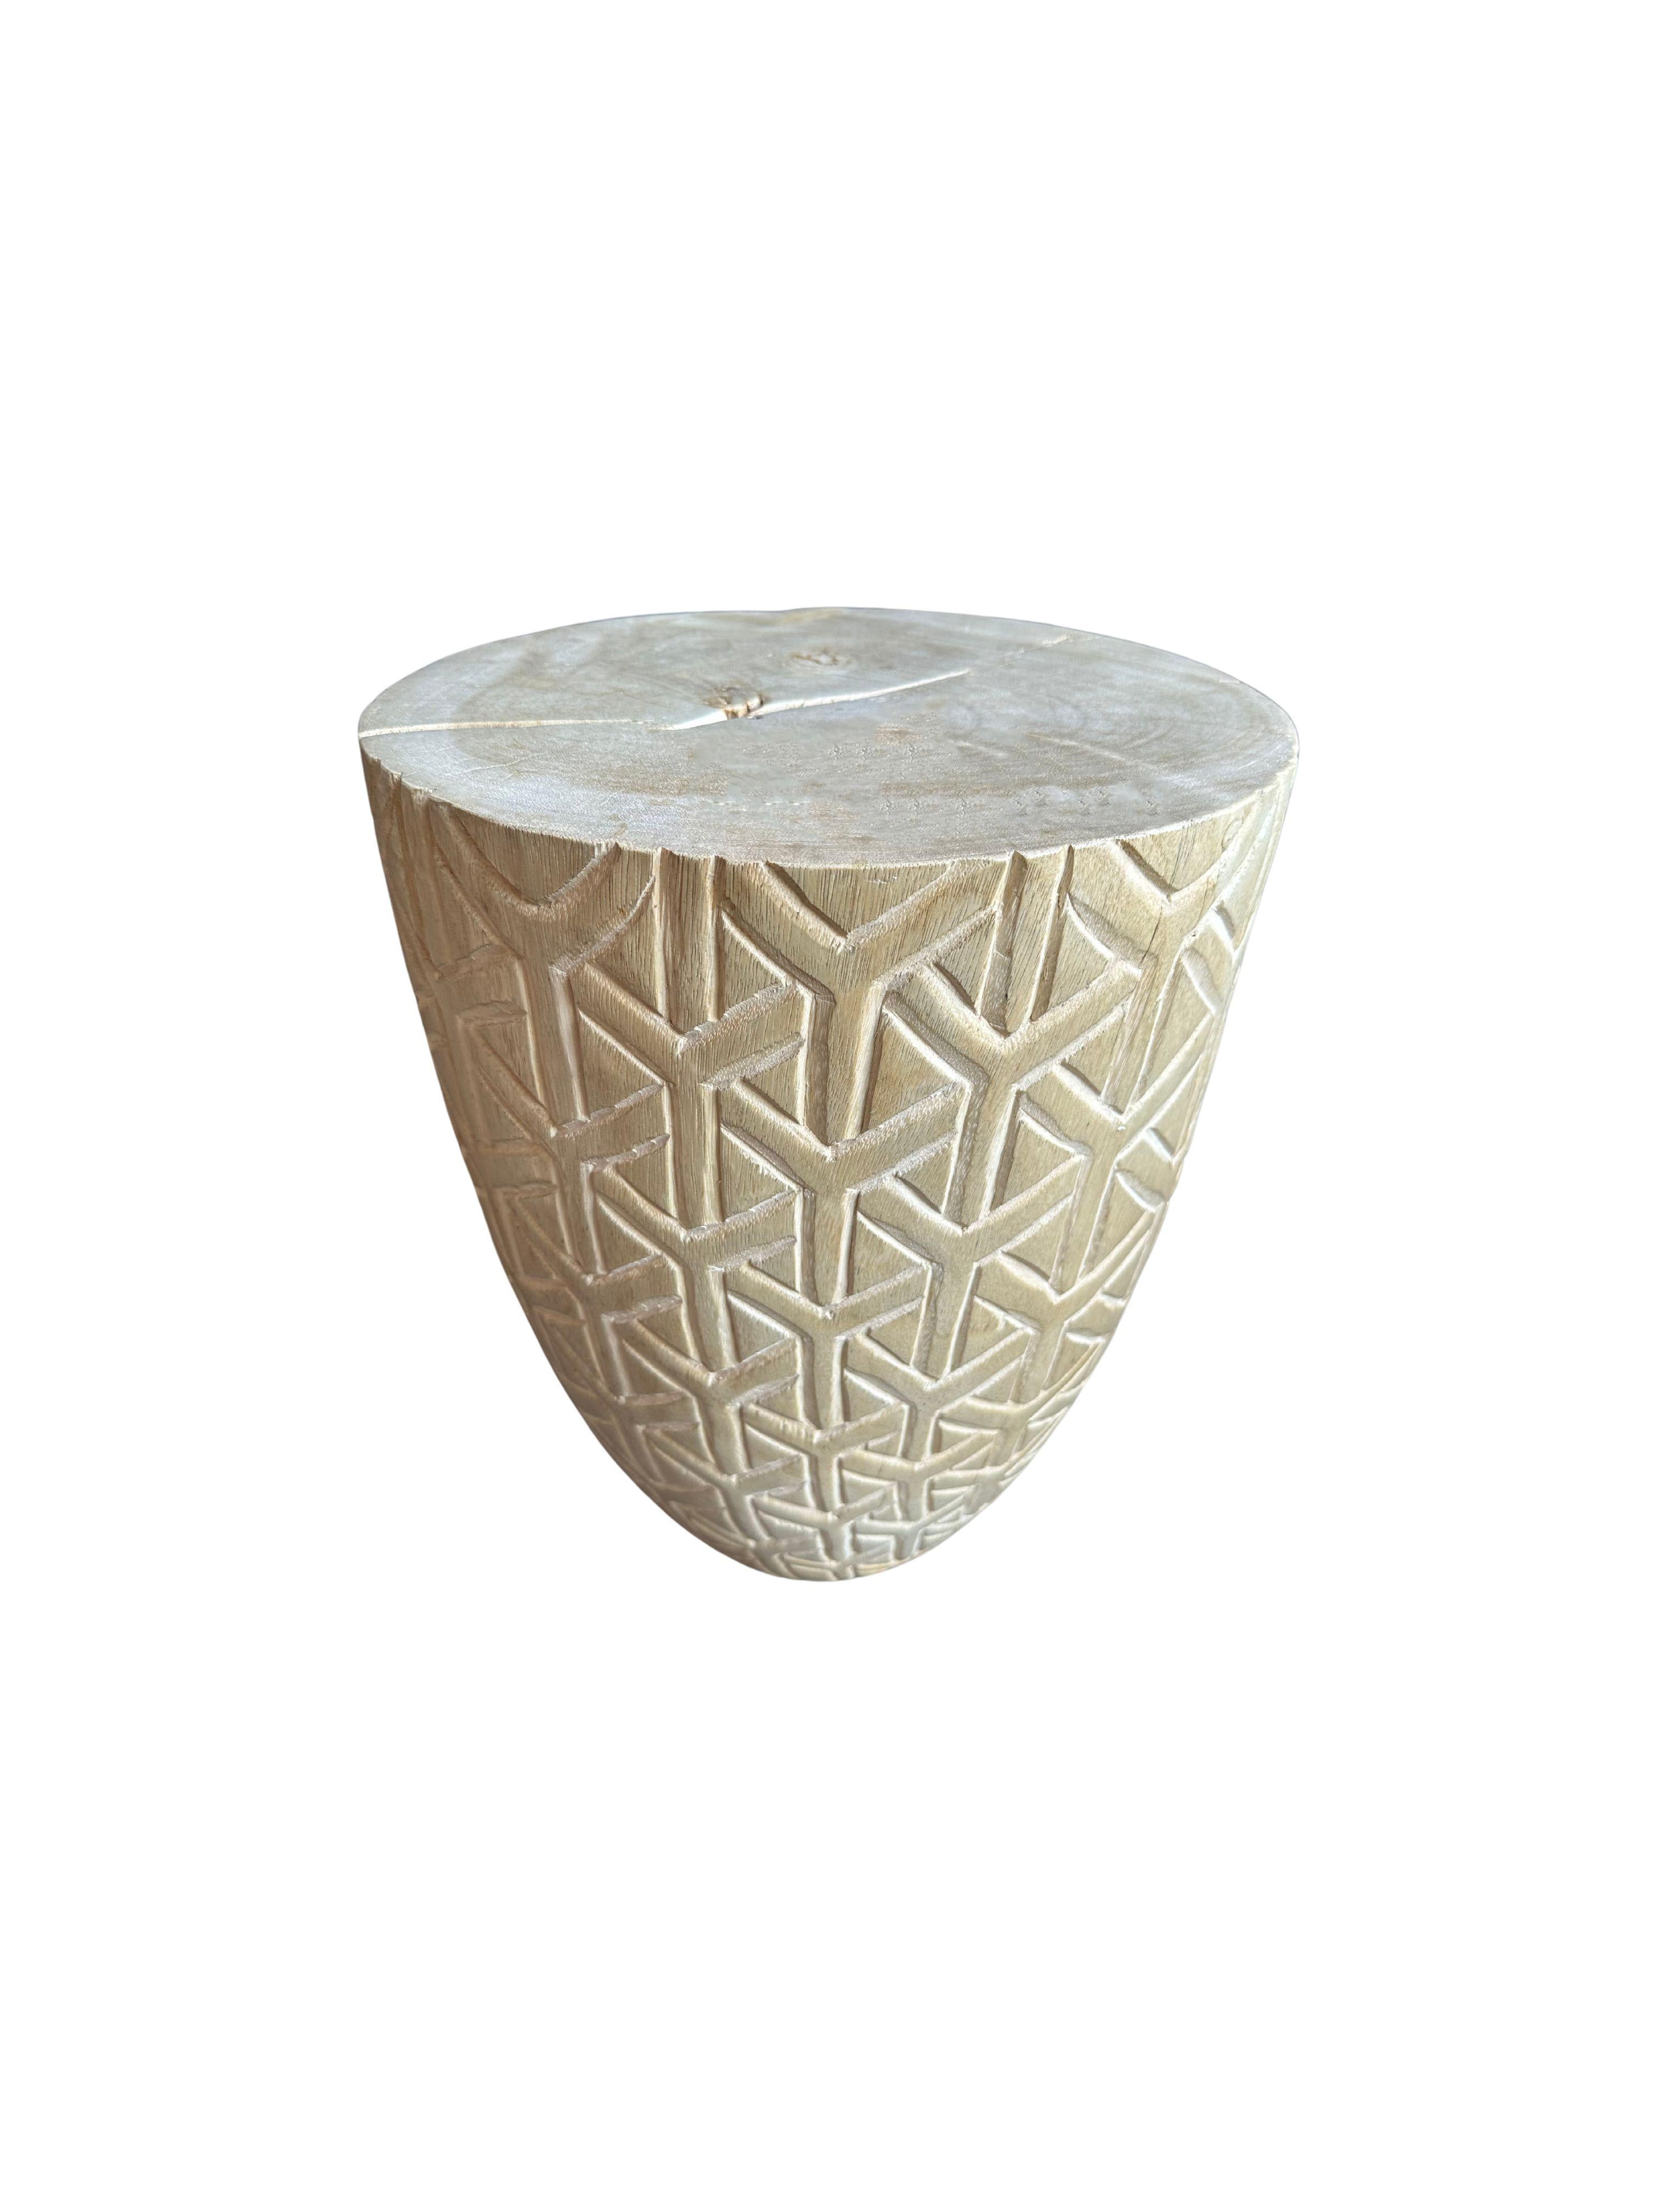 A wonderfully sculptural side table with a geometric pattern hand-carved on all sides. Its pigment was achieved through bleaching the wood. Its neutral pigment and subtle wood texture makes it perfect for any space. . This table was crafted from